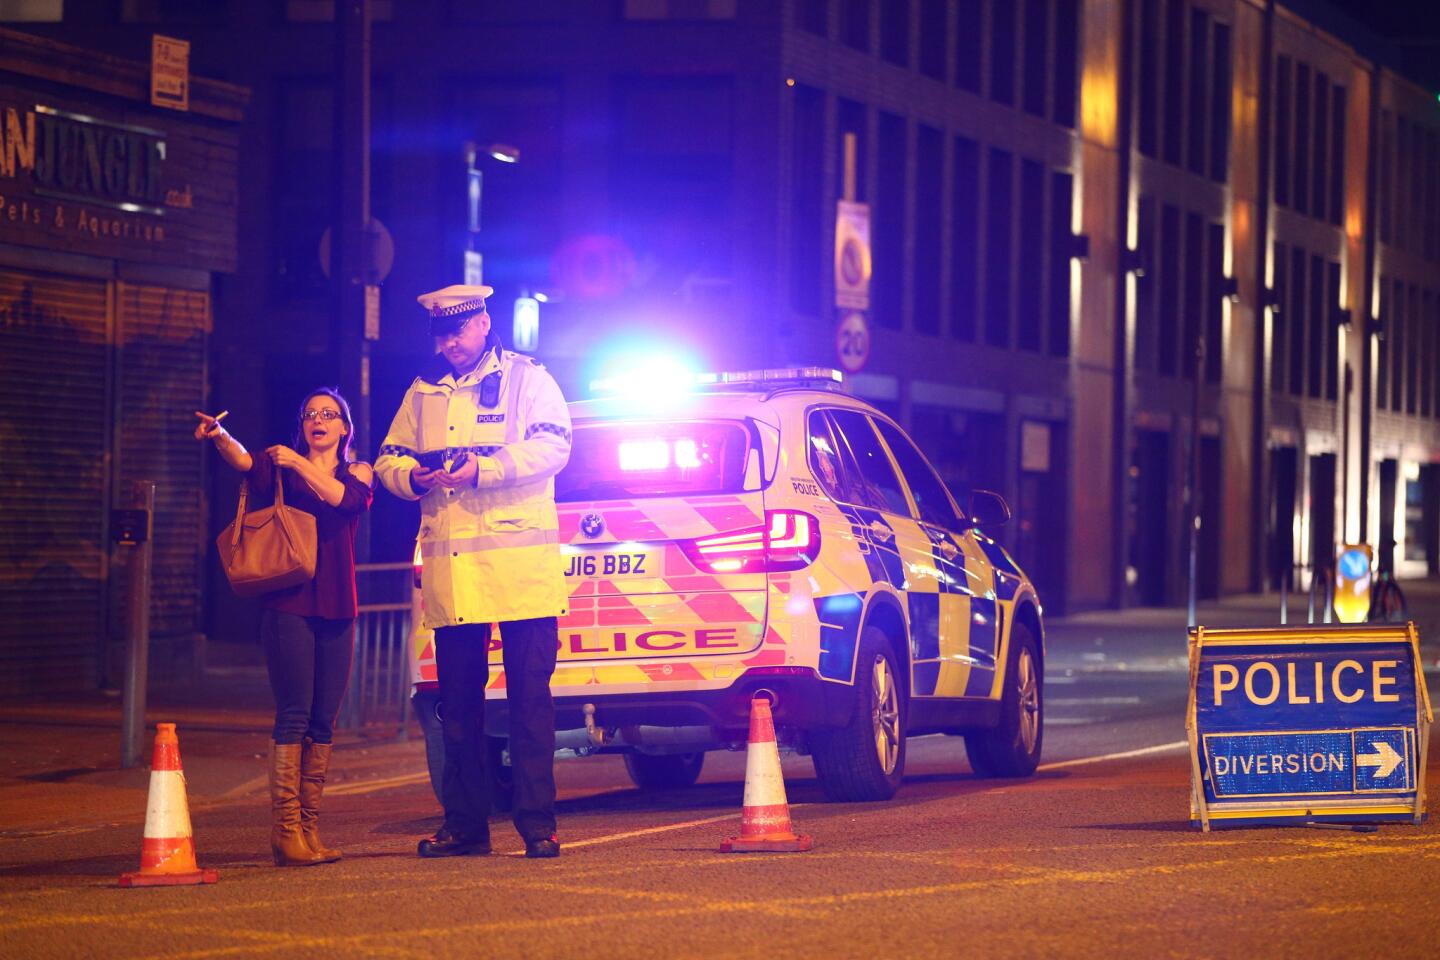 Police stand by a cordoned-off street close to the Manchester Arena on May 22, 2017, in Manchester, England, after an explosion at an Ariana Grande concert.